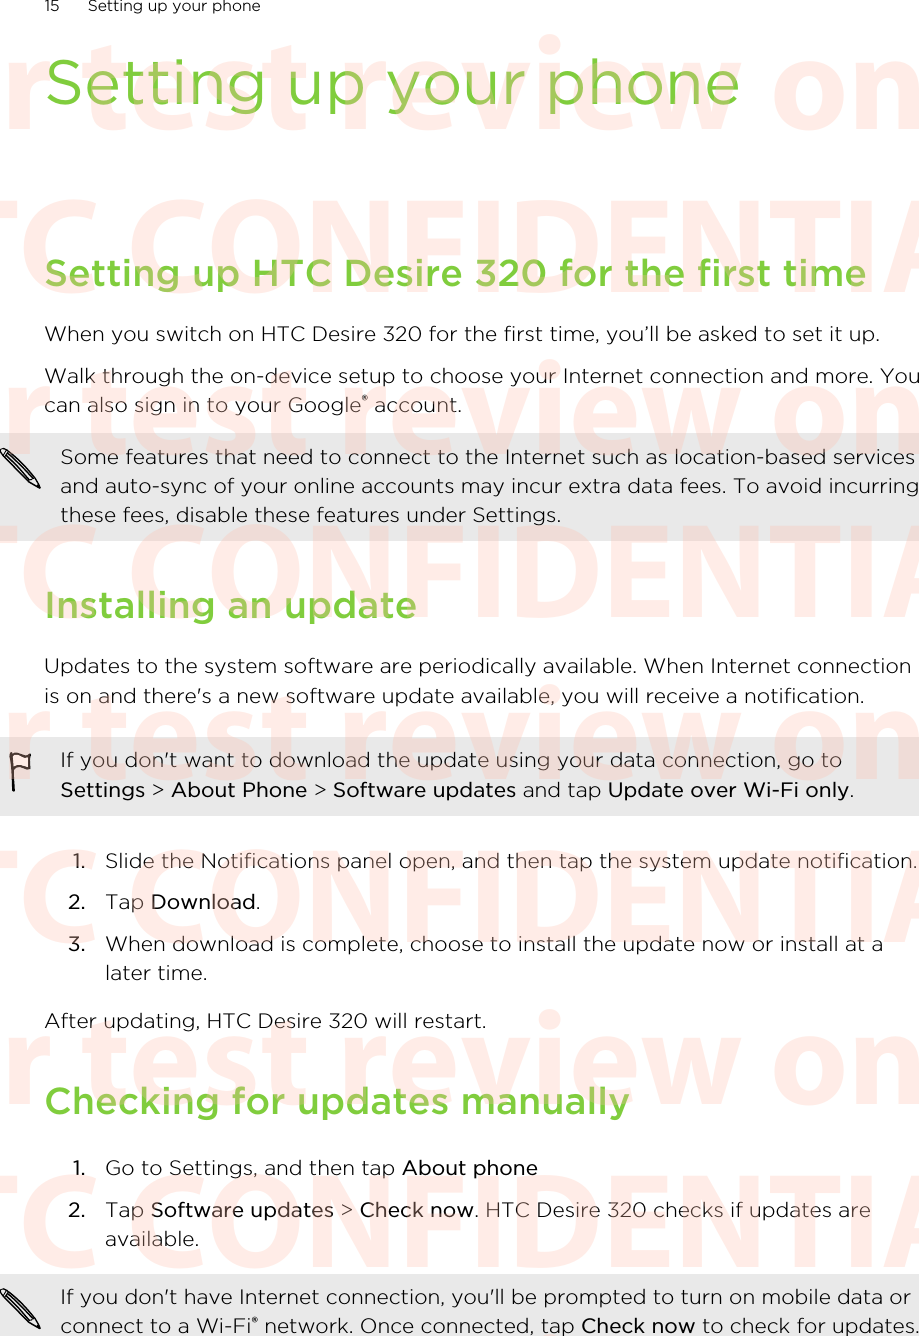 Setting up your phoneSetting up HTC Desire 320 for the first timeWhen you switch on HTC Desire 320 for the first time, you’ll be asked to set it up.Walk through the on-device setup to choose your Internet connection and more. Youcan also sign in to your Google® account.Some features that need to connect to the Internet such as location-based servicesand auto-sync of your online accounts may incur extra data fees. To avoid incurringthese fees, disable these features under Settings.Installing an updateUpdates to the system software are periodically available. When Internet connectionis on and there&apos;s a new software update available, you will receive a notification.If you don&apos;t want to download the update using your data connection, go toSettings &gt; About Phone &gt; Software updates and tap Update over Wi-Fi only.1. Slide the Notifications panel open, and then tap the system update notification.2. Tap Download.3. When download is complete, choose to install the update now or install at alater time.After updating, HTC Desire 320 will restart.Checking for updates manually1. Go to Settings, and then tap About phone2. Tap Software updates &gt; Check now. HTC Desire 320 checks if updates areavailable.If you don&apos;t have Internet connection, you&apos;ll be prompted to turn on mobile data orconnect to a Wi-Fi® network. Once connected, tap Check now to check for updates.15 Setting up your phoneHTC CONFIDENTIAL For test review only HTC CONFIDENTIAL For test review only HTC CONFIDENTIAL For test review only HTC CONFIDENTIAL For test review only HTC CONFIDENTIAL For test review only HTC CONFIDENTIAL For test review only